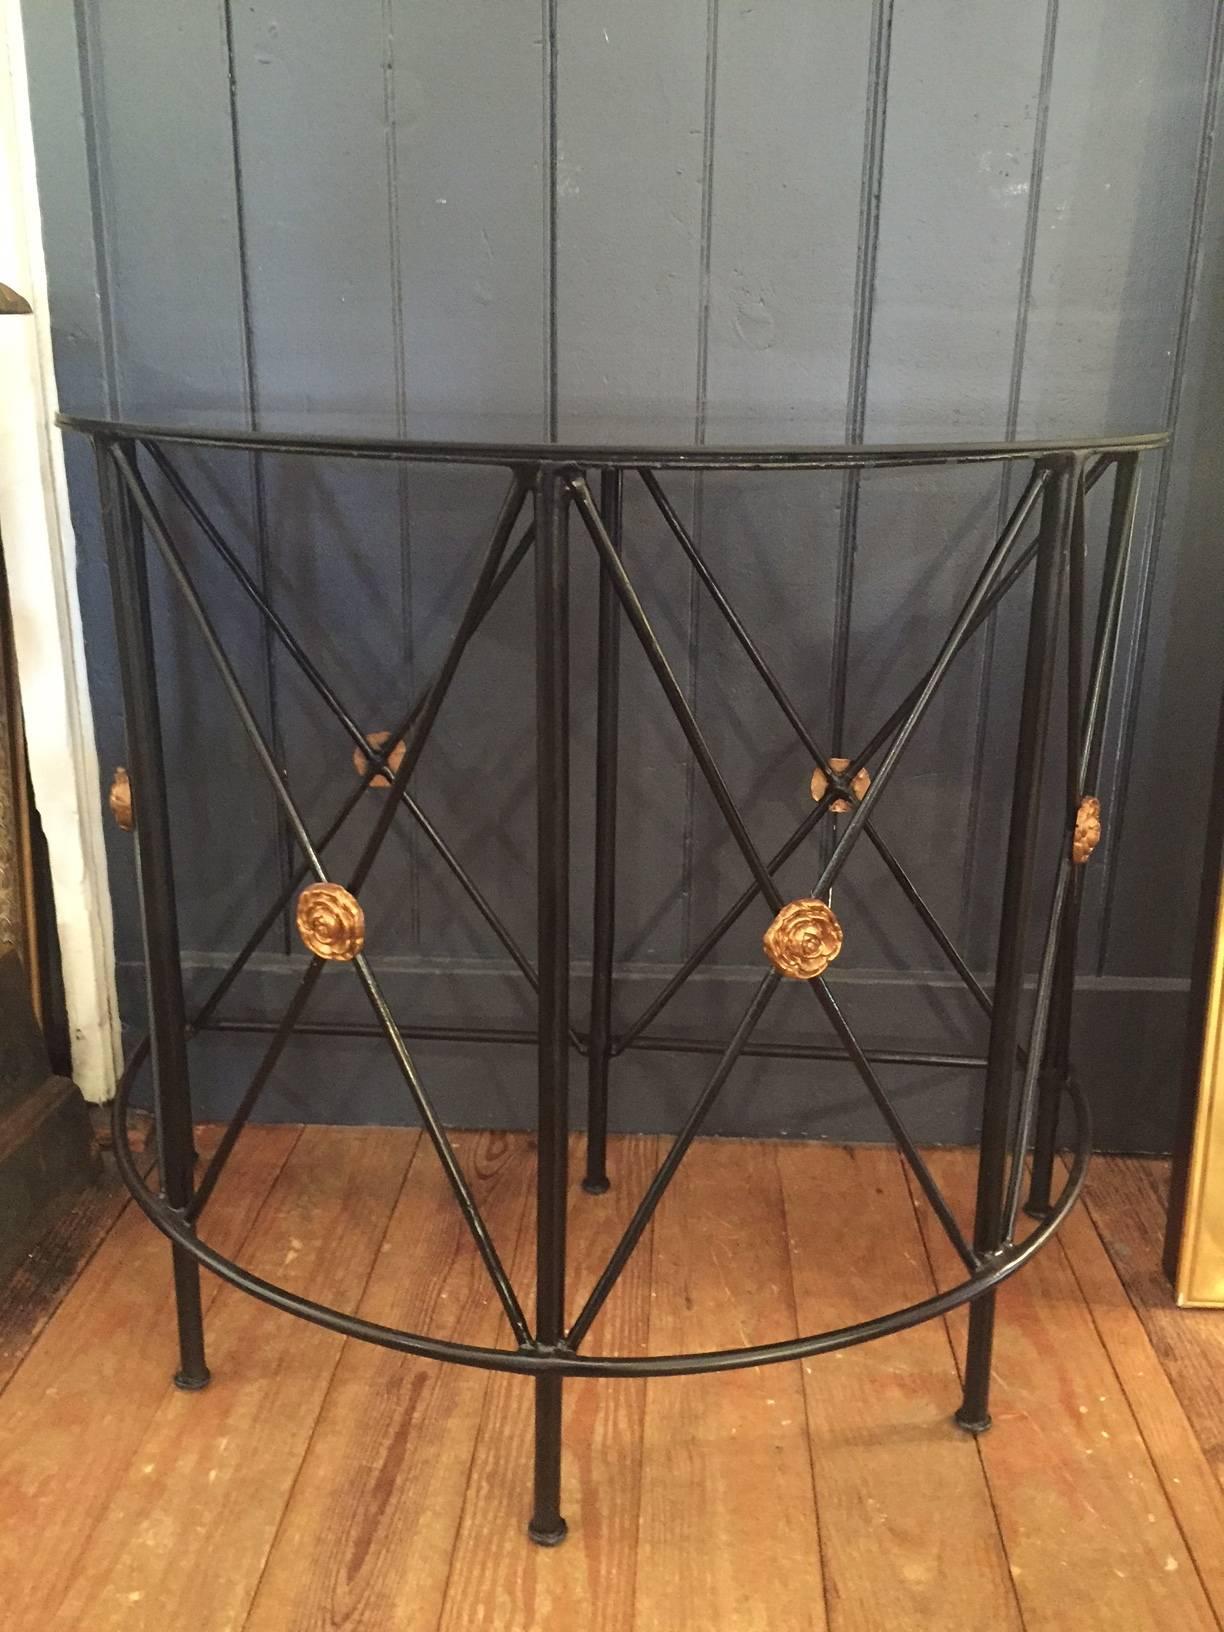 Stylish black metal neoclassical style demilune with black glass top and gold leaf florets.
Dimensions: 30.5" H X 35.5" L X $18.5" D.
 